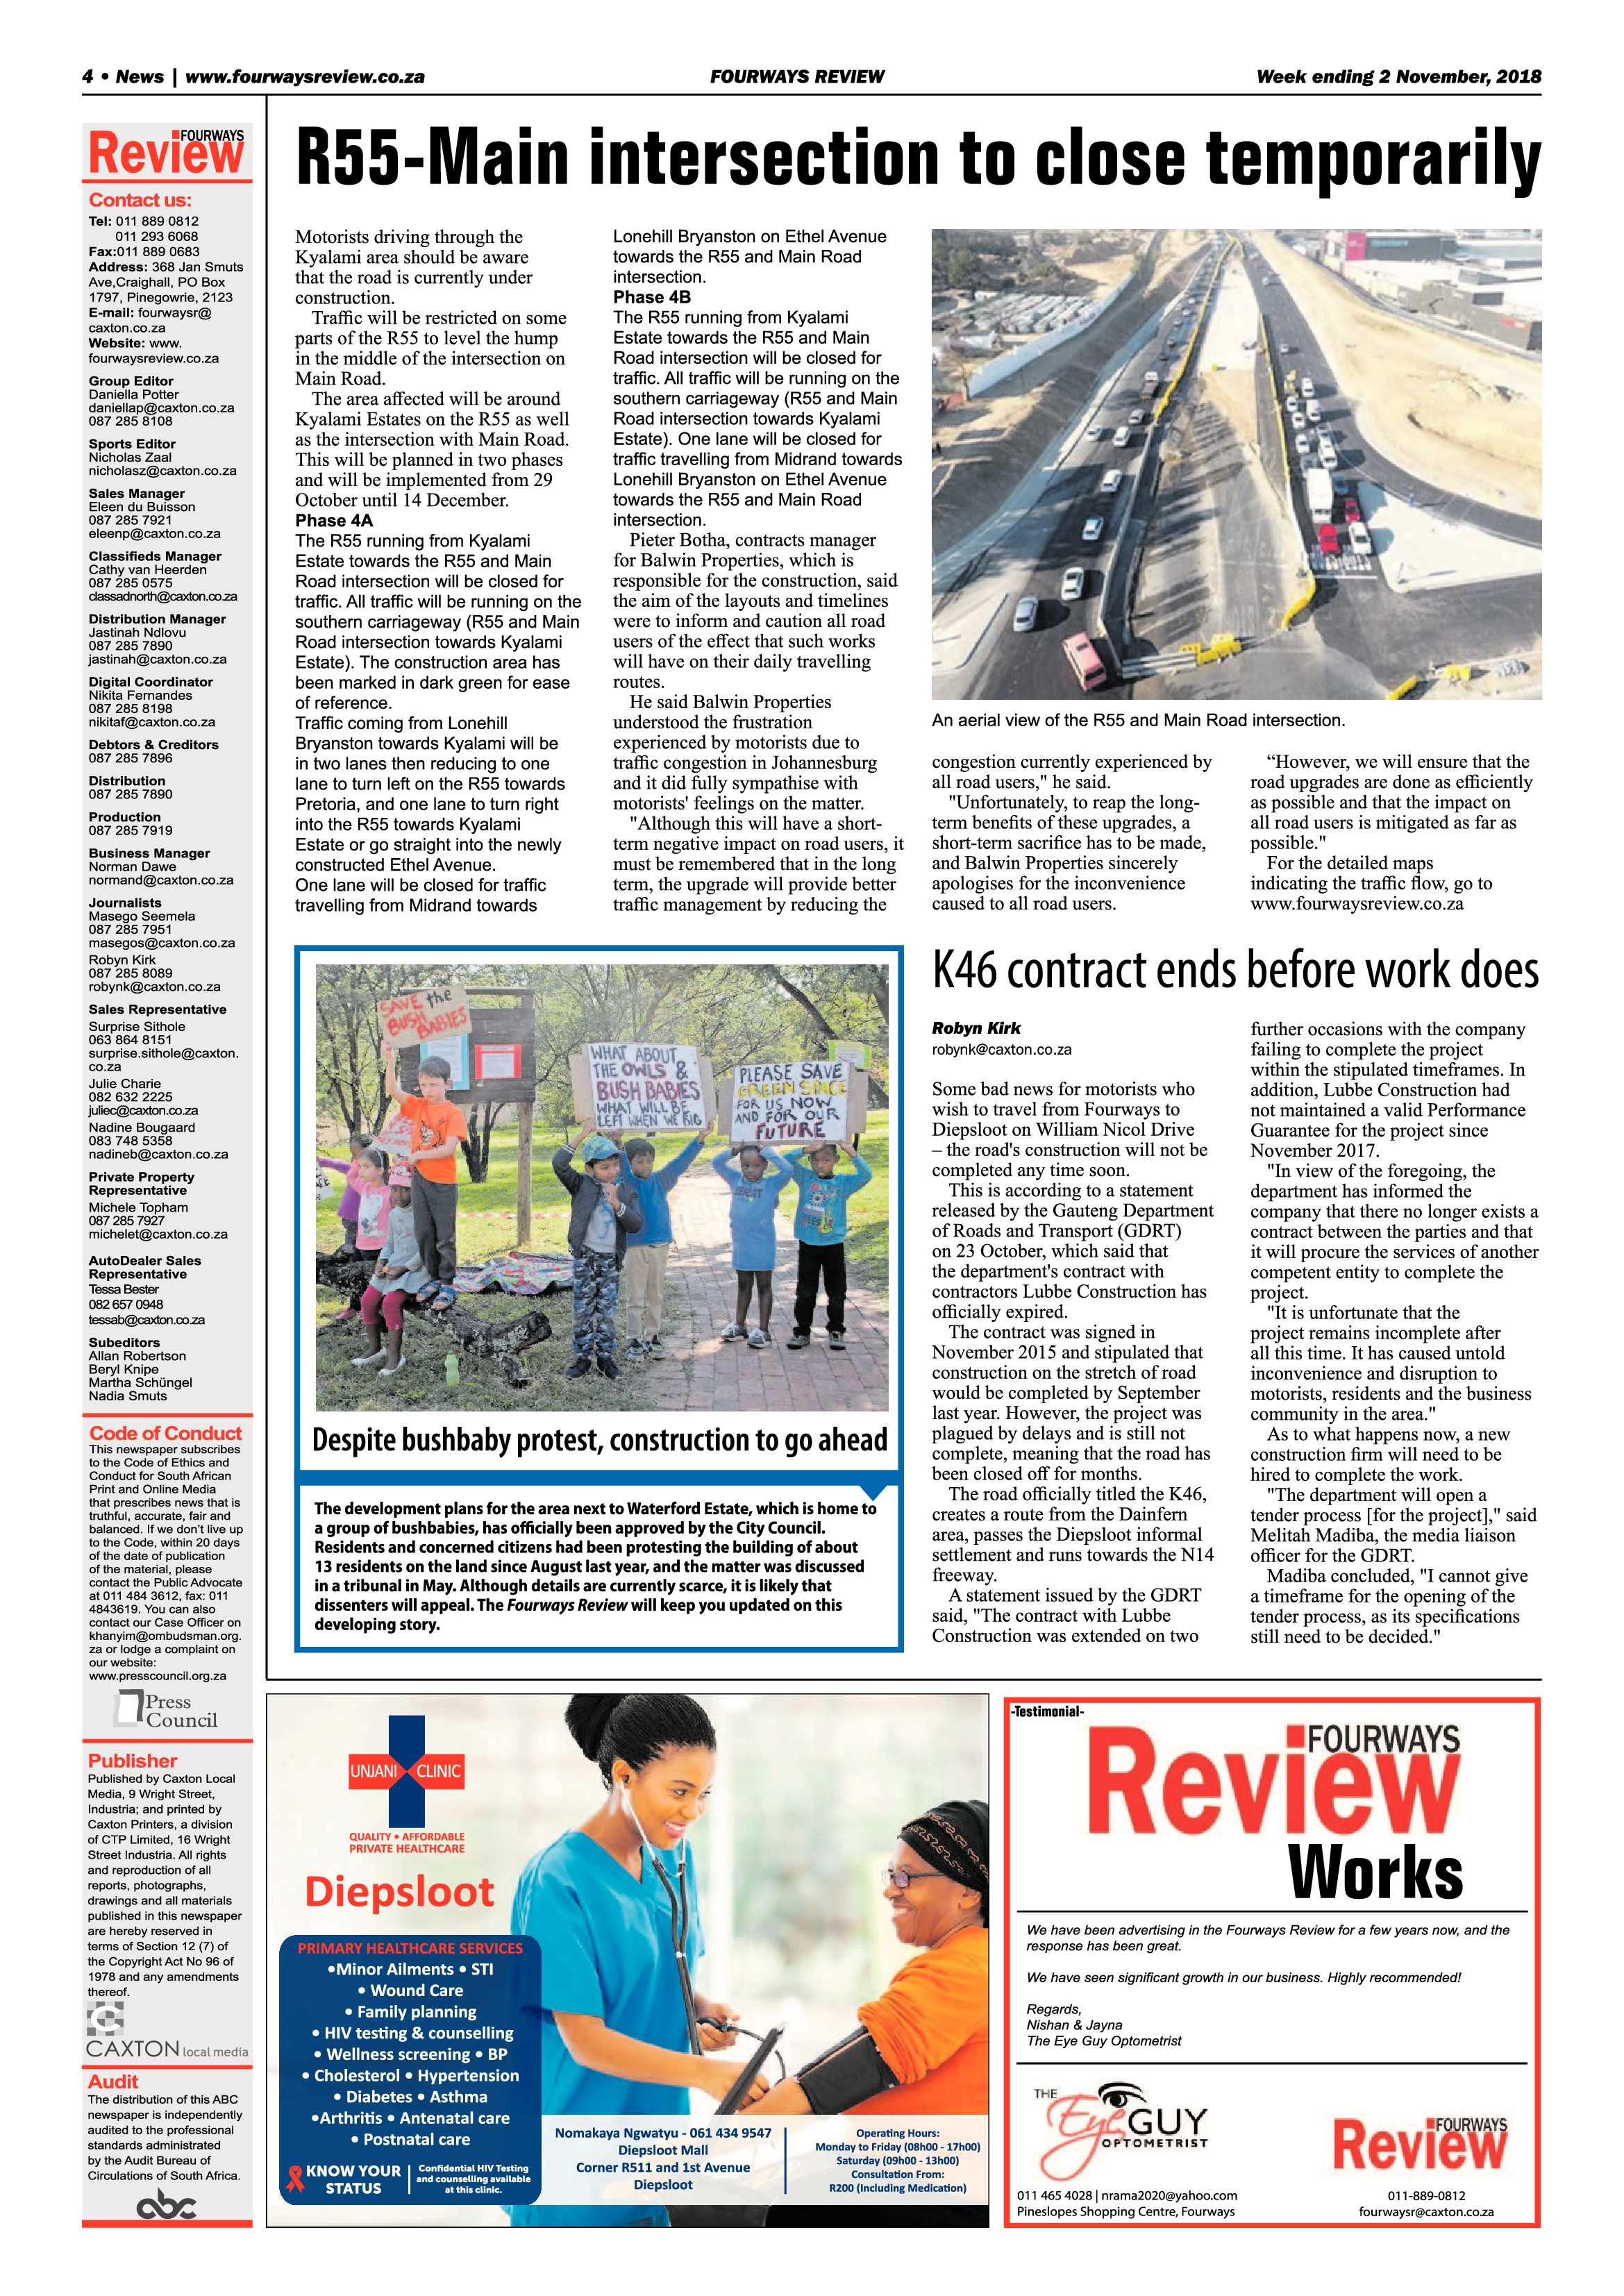 Fourways Review 2 November, 2018 page 4